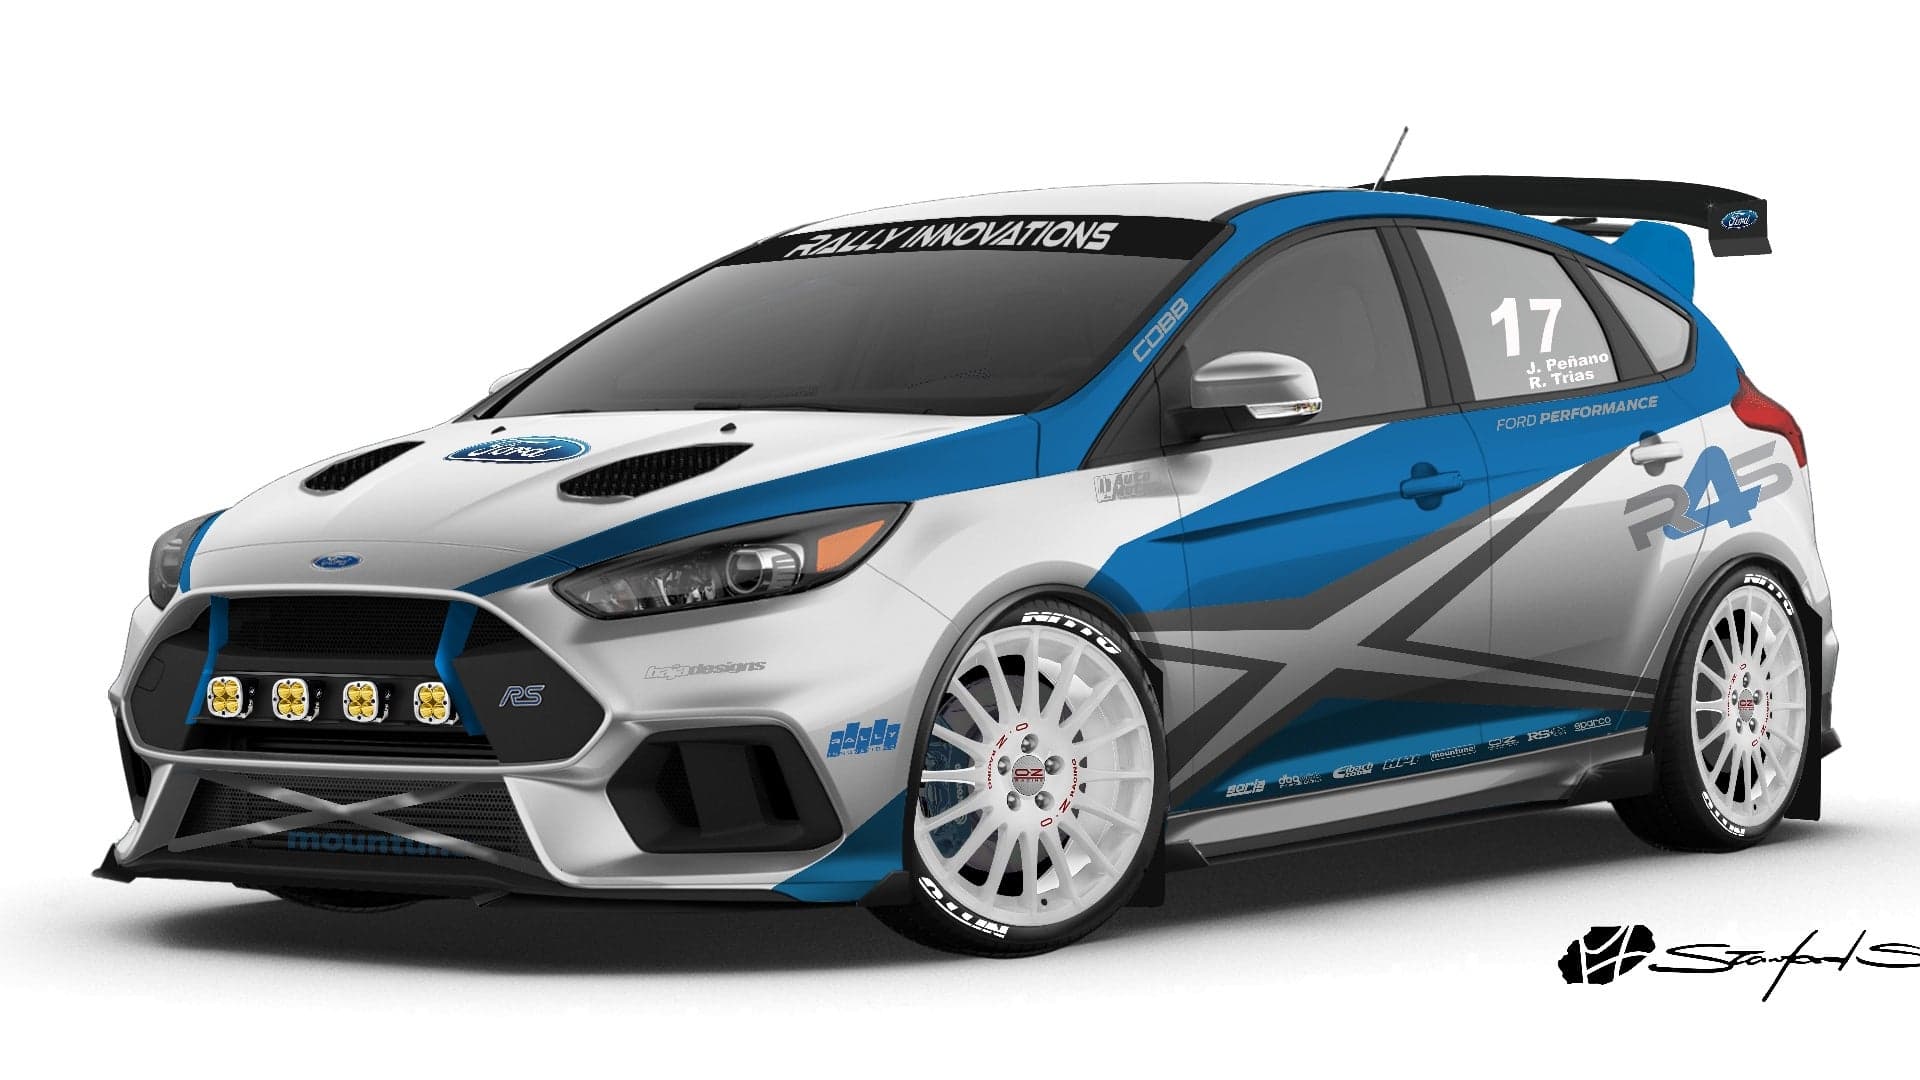 Check Out These Custom Ford Focus ST and RS Models Coming to SEMA